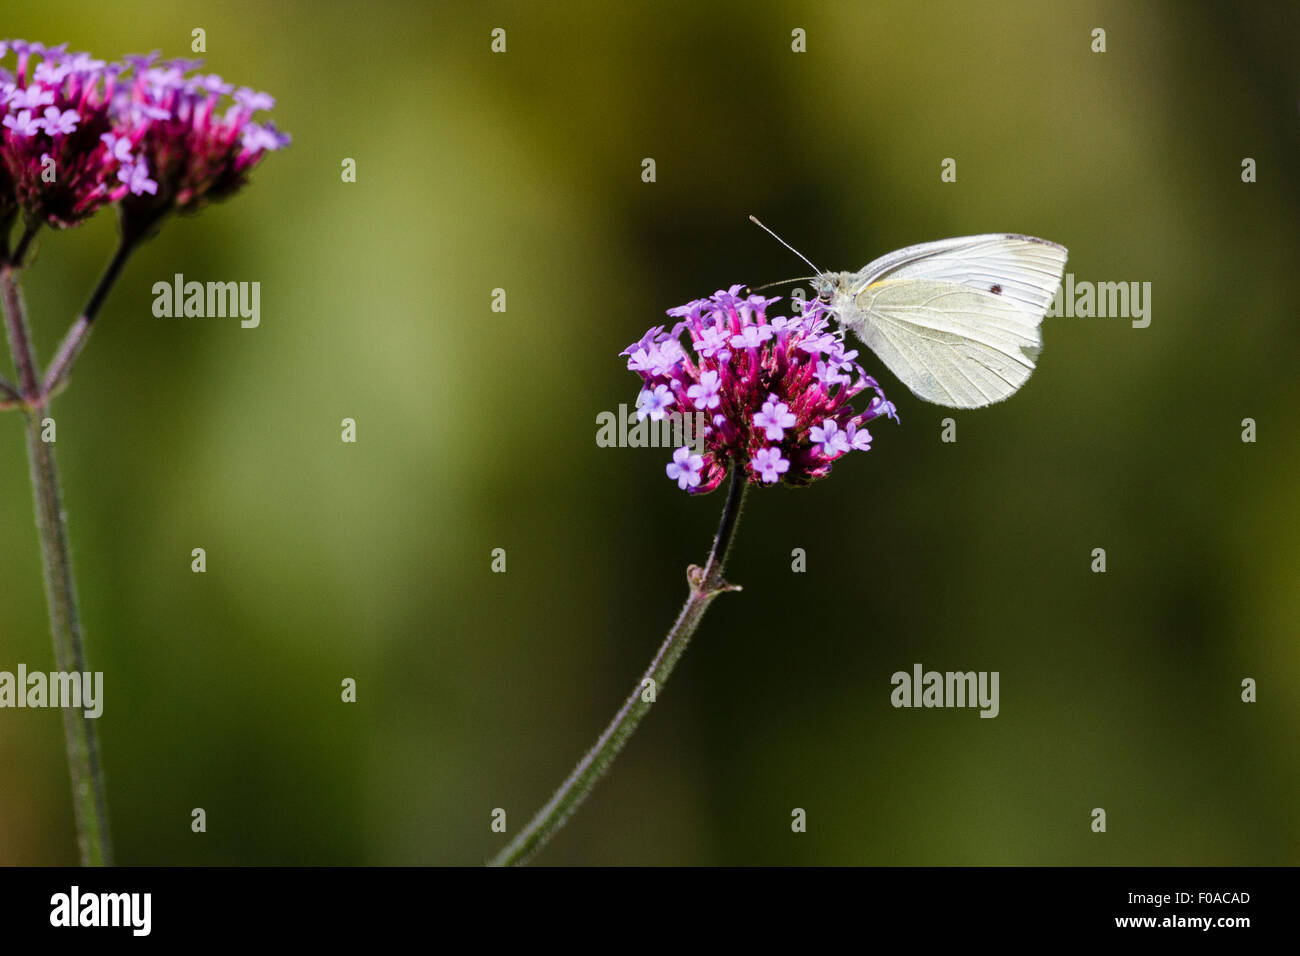 Small white or cabbage white butterfly (Pieris rapae) on Verbena flower, East Sussex garden, UK Stock Photo